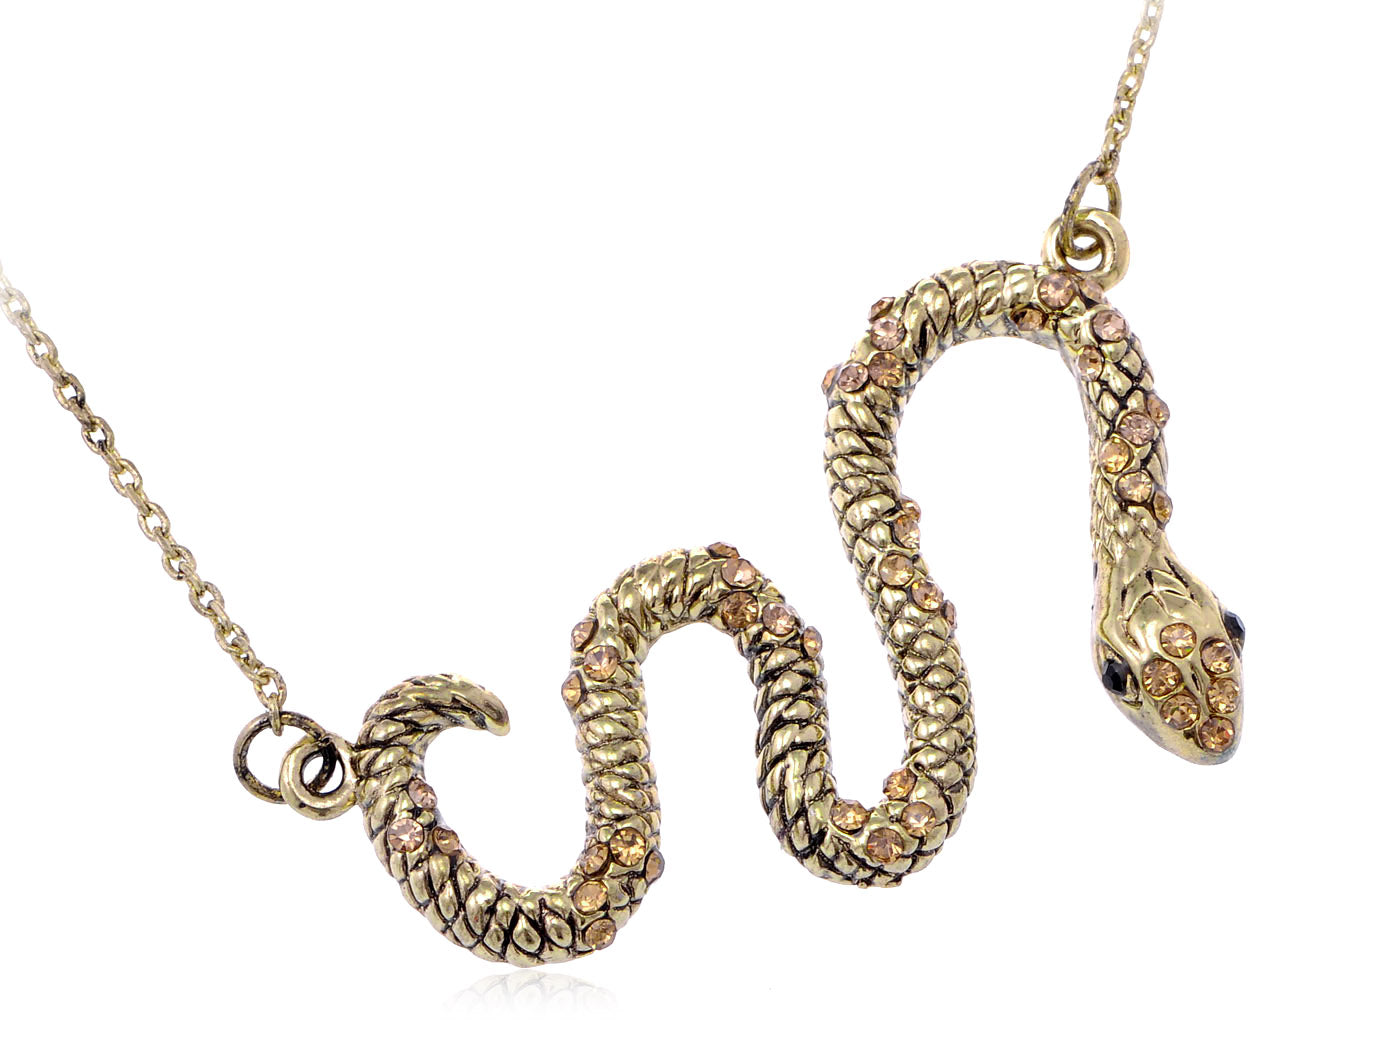 Antique Encrusted Snake Chain Necklace